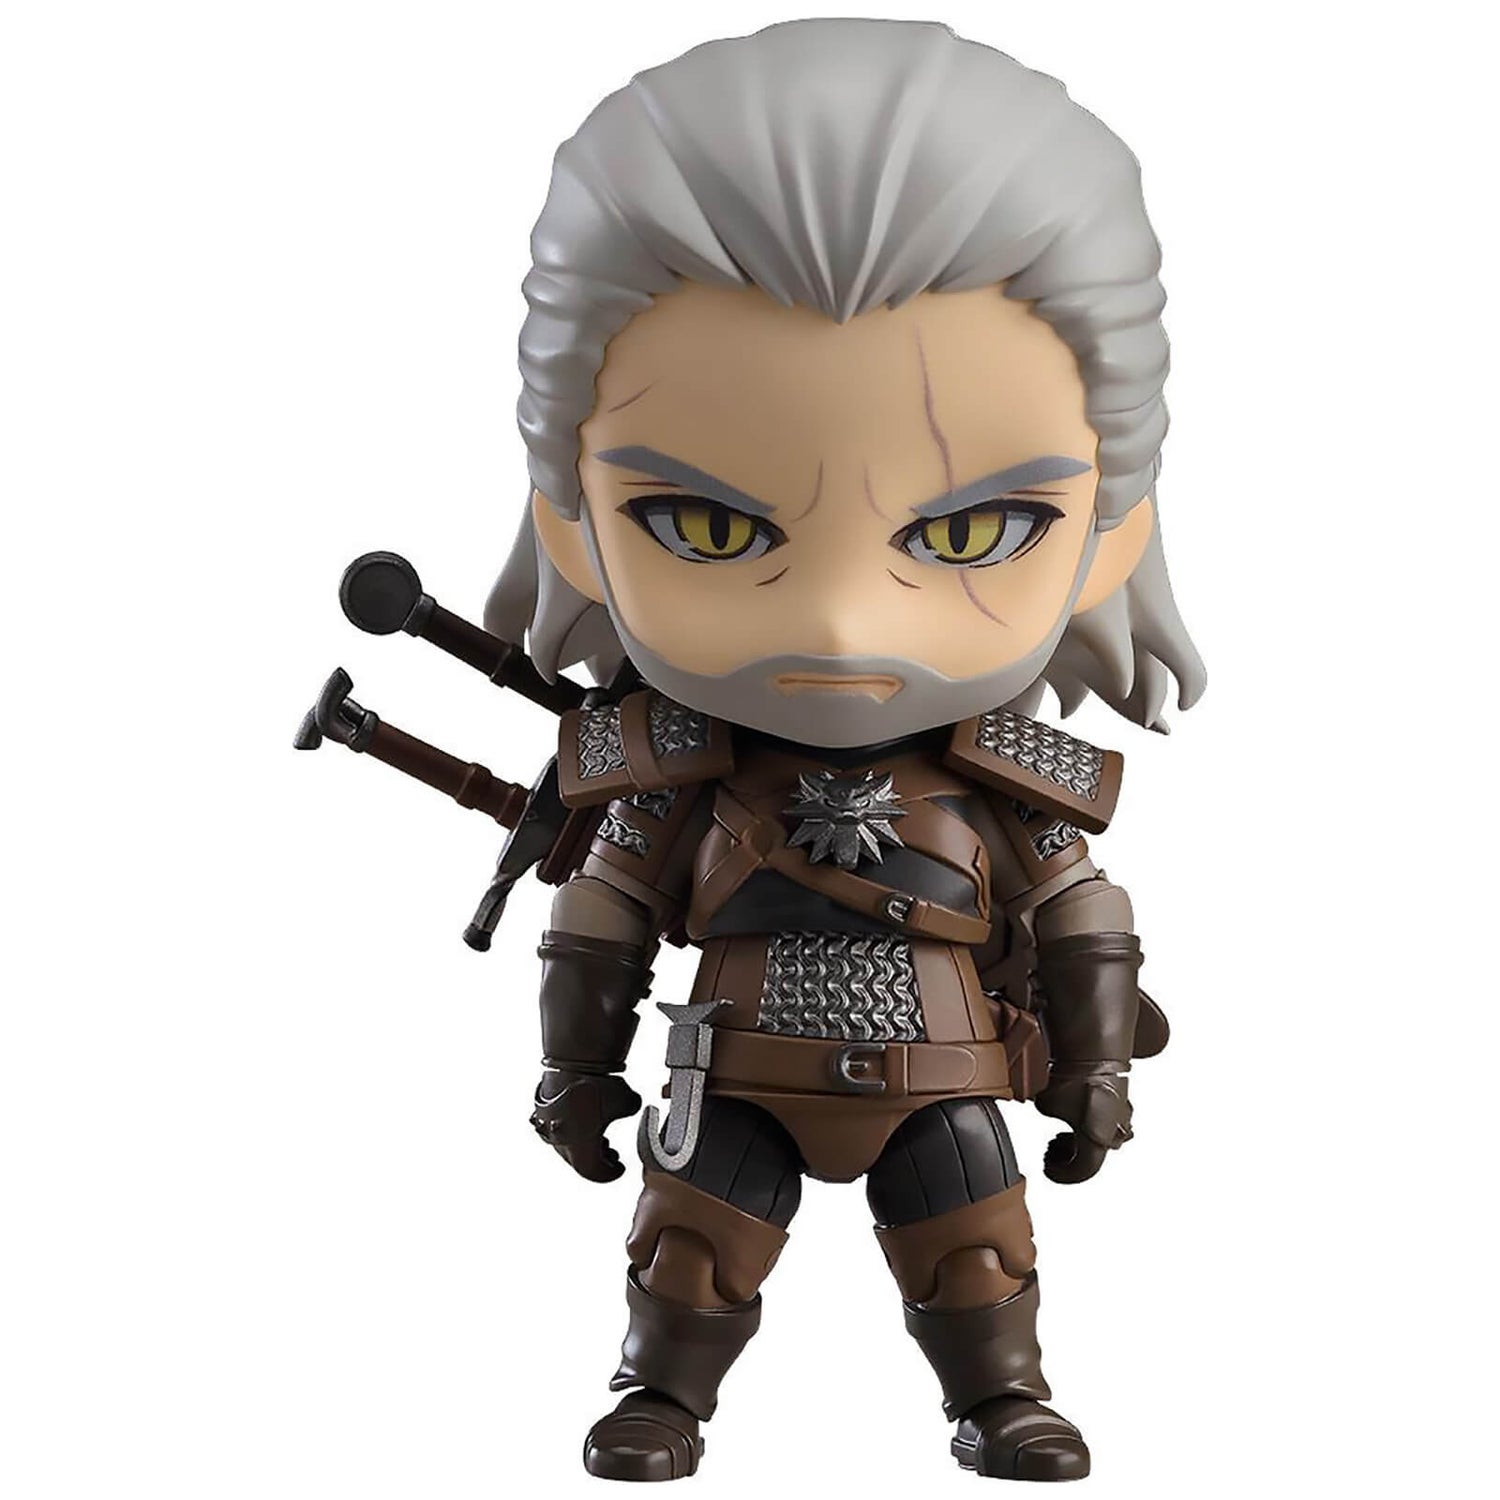 Starting a Funko Pop Witcher Collection : r/witcher